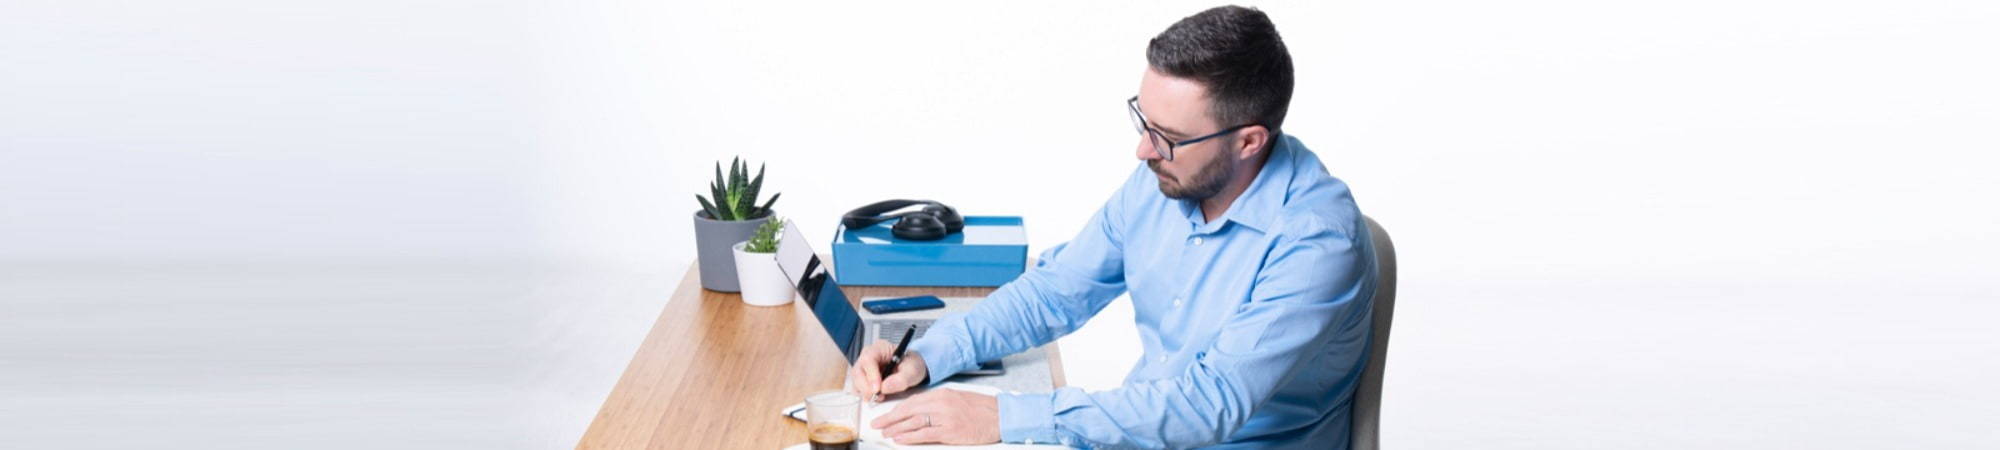 Man at desk writing a blog making notes with a pen